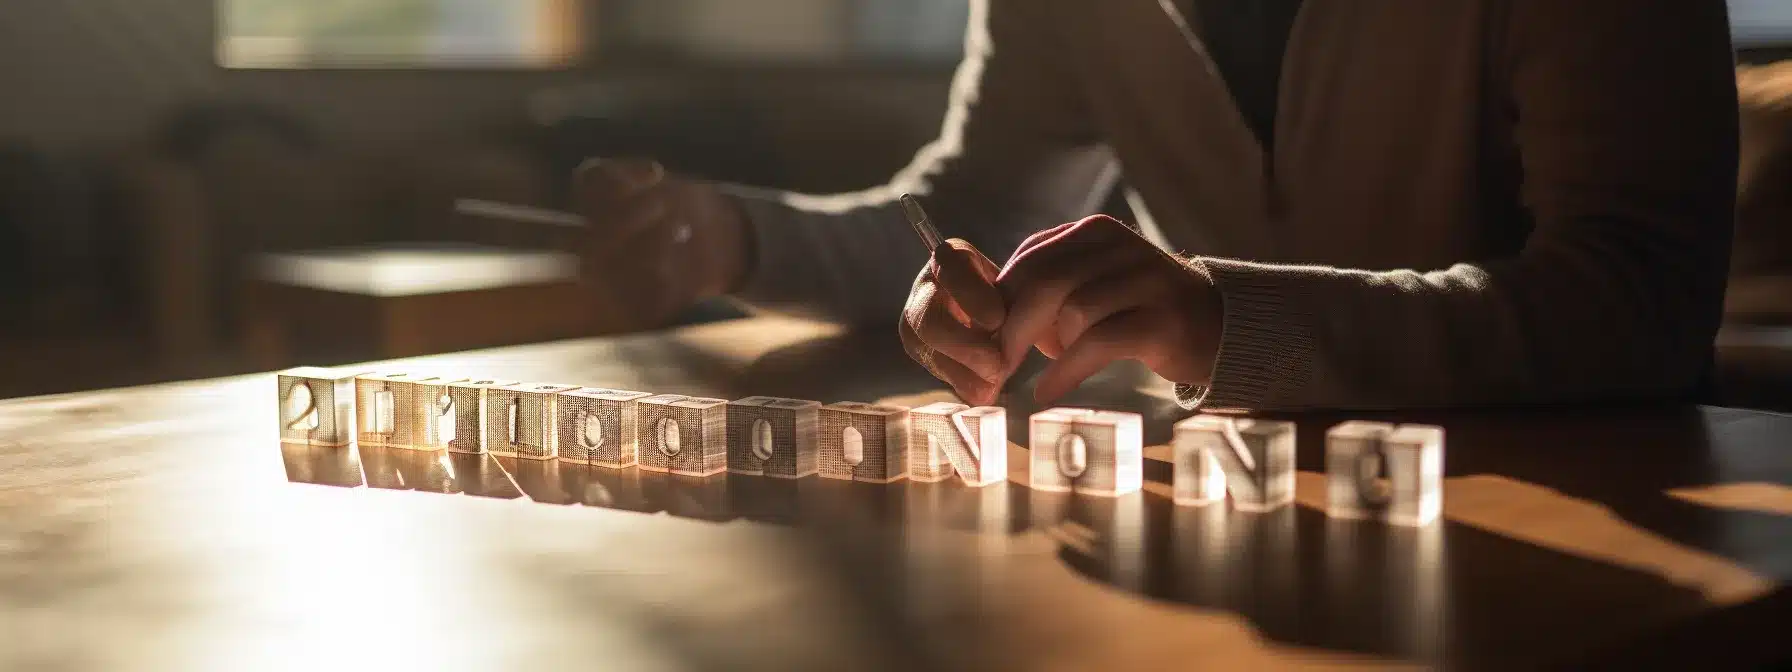 A Person Carefully Weaving Words Together To Create A Brand Message, With A Beam Of Light Shining On The Words.